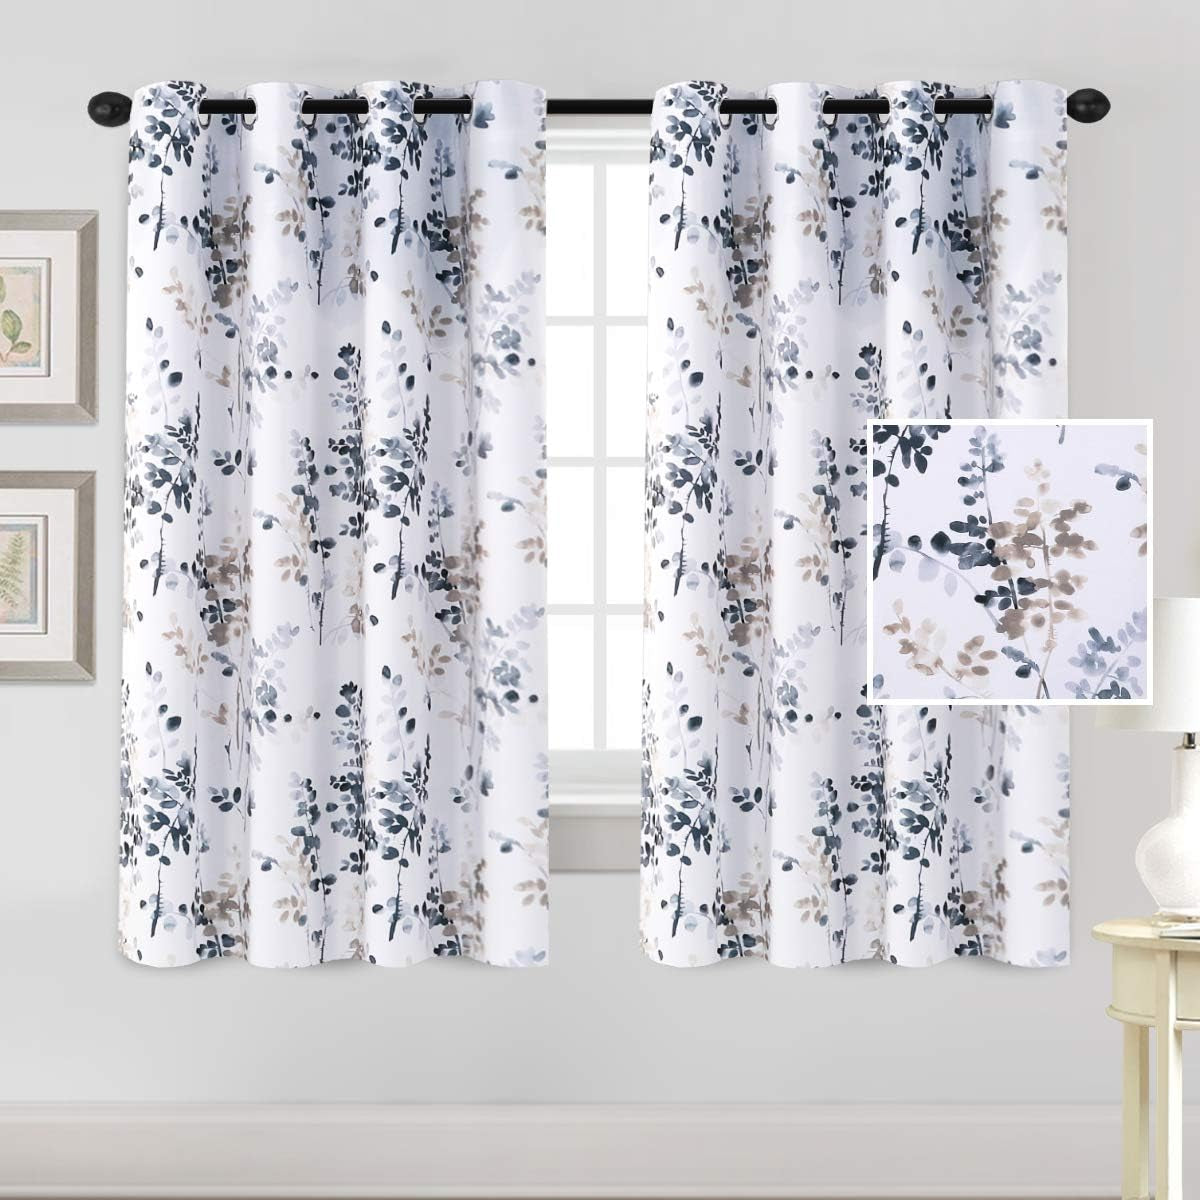 H.VERSAILTEX Blackout Curtains 45 Inch Length 2 Panels Set Room Darkening Thermal Curtains for Bedroom Sound Proof Grommet Floral Curtains, Bluestone and Taupe Vintage Classical Floral Printing  H.VERSAILTEX   